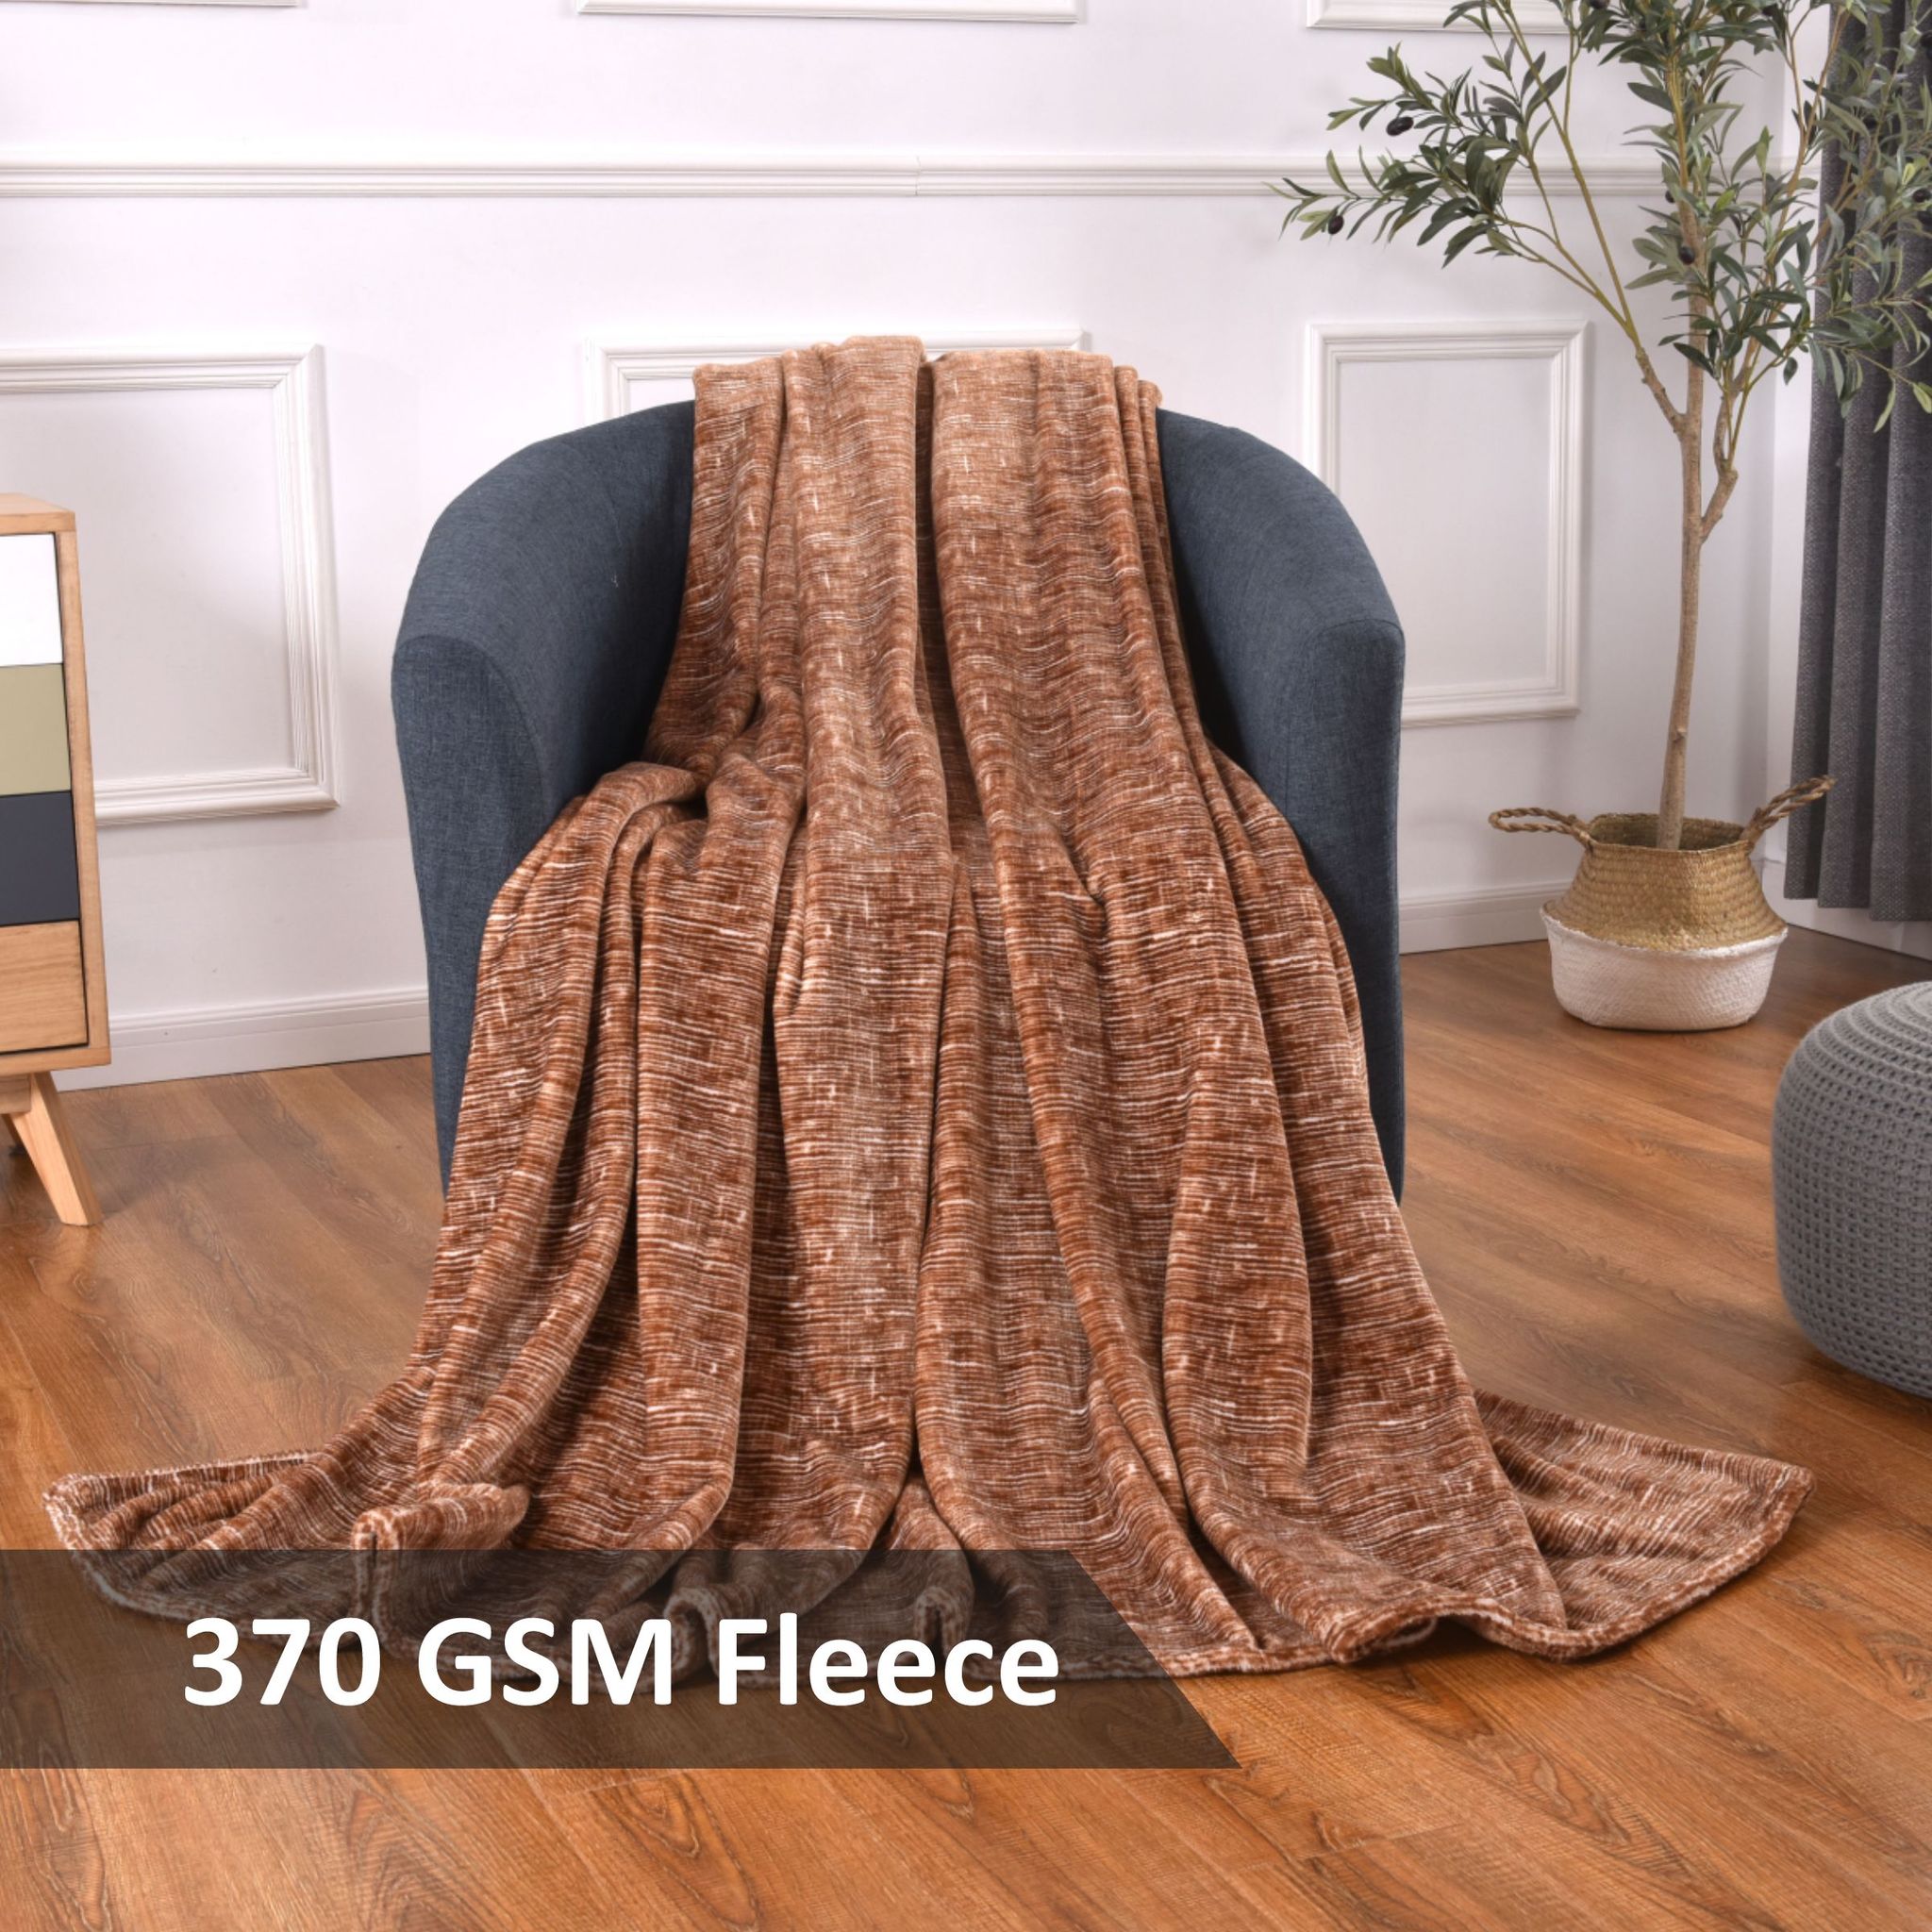 Fleece Blanket Twin Size,370GSM Soft and Cozy Lightweight Velvet Blanket Ideal For Couch, Bed, Travel, Camping , Brown